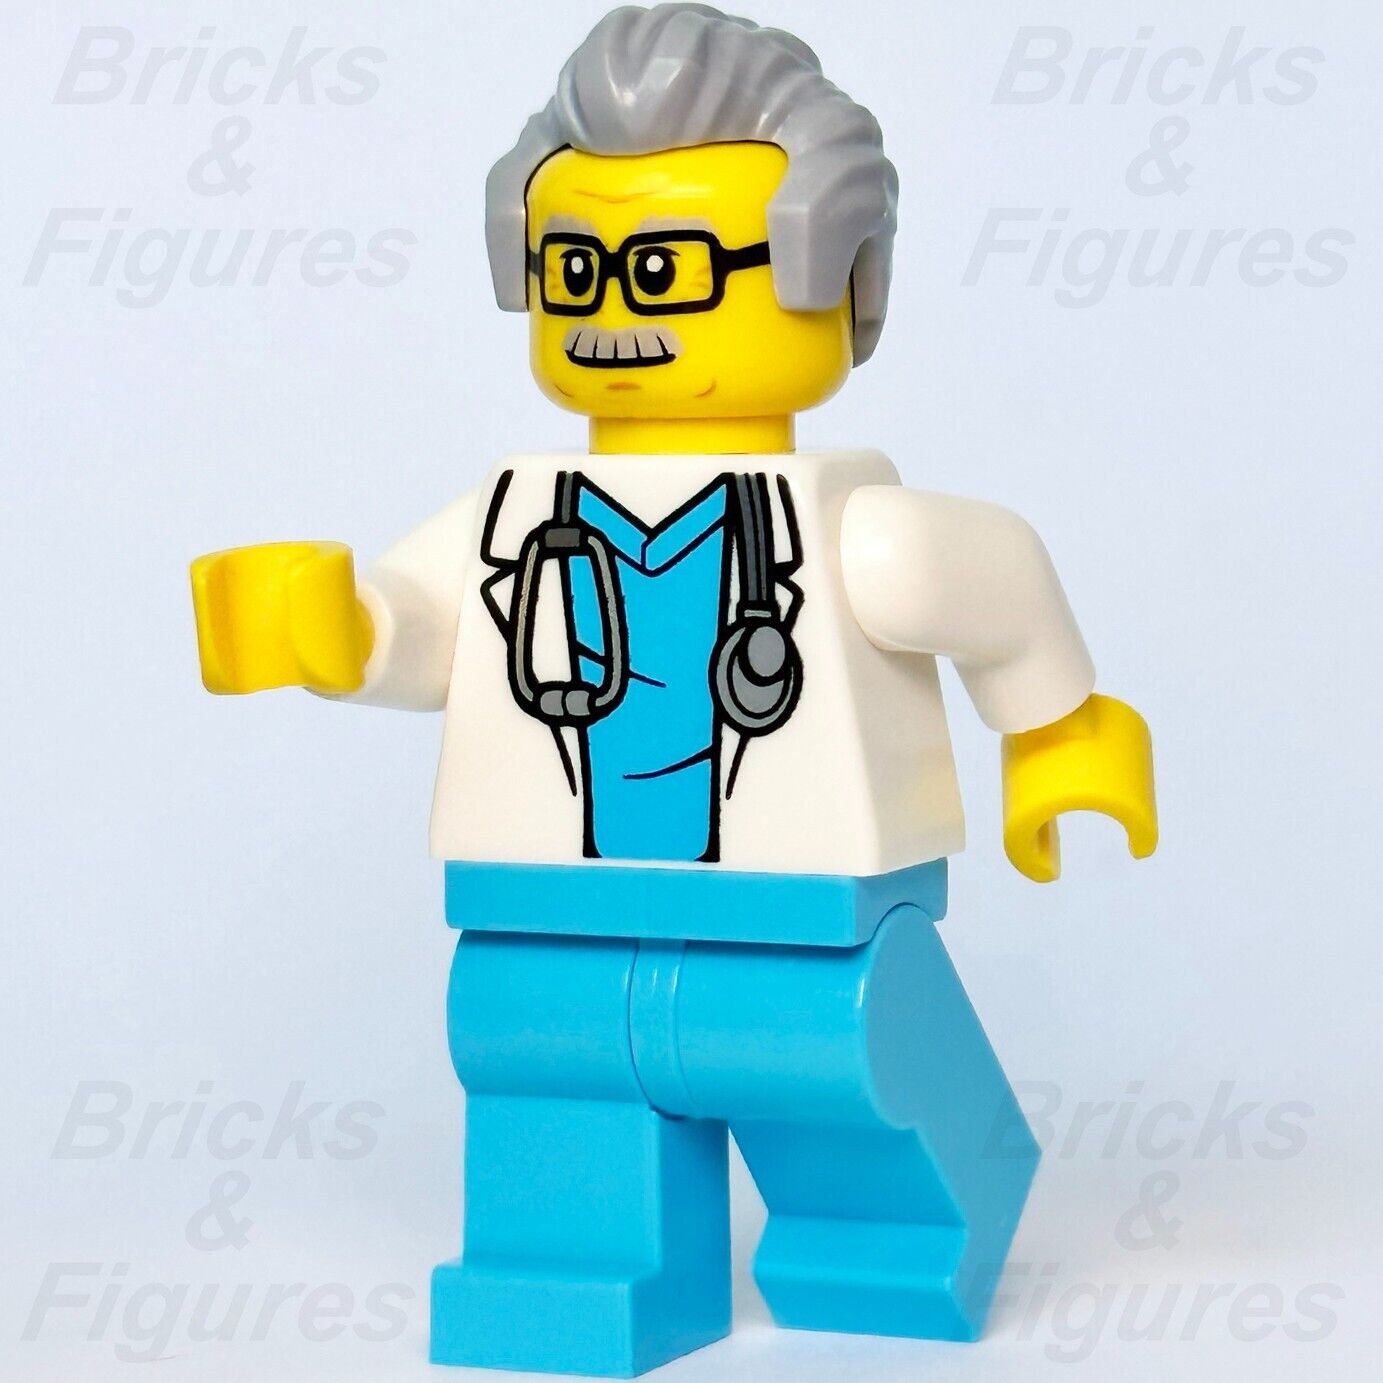 LEGO Town City Doctor Minifigure with Glasses Blue Top Hospital 60350 cty1341 - Bricks & Figures